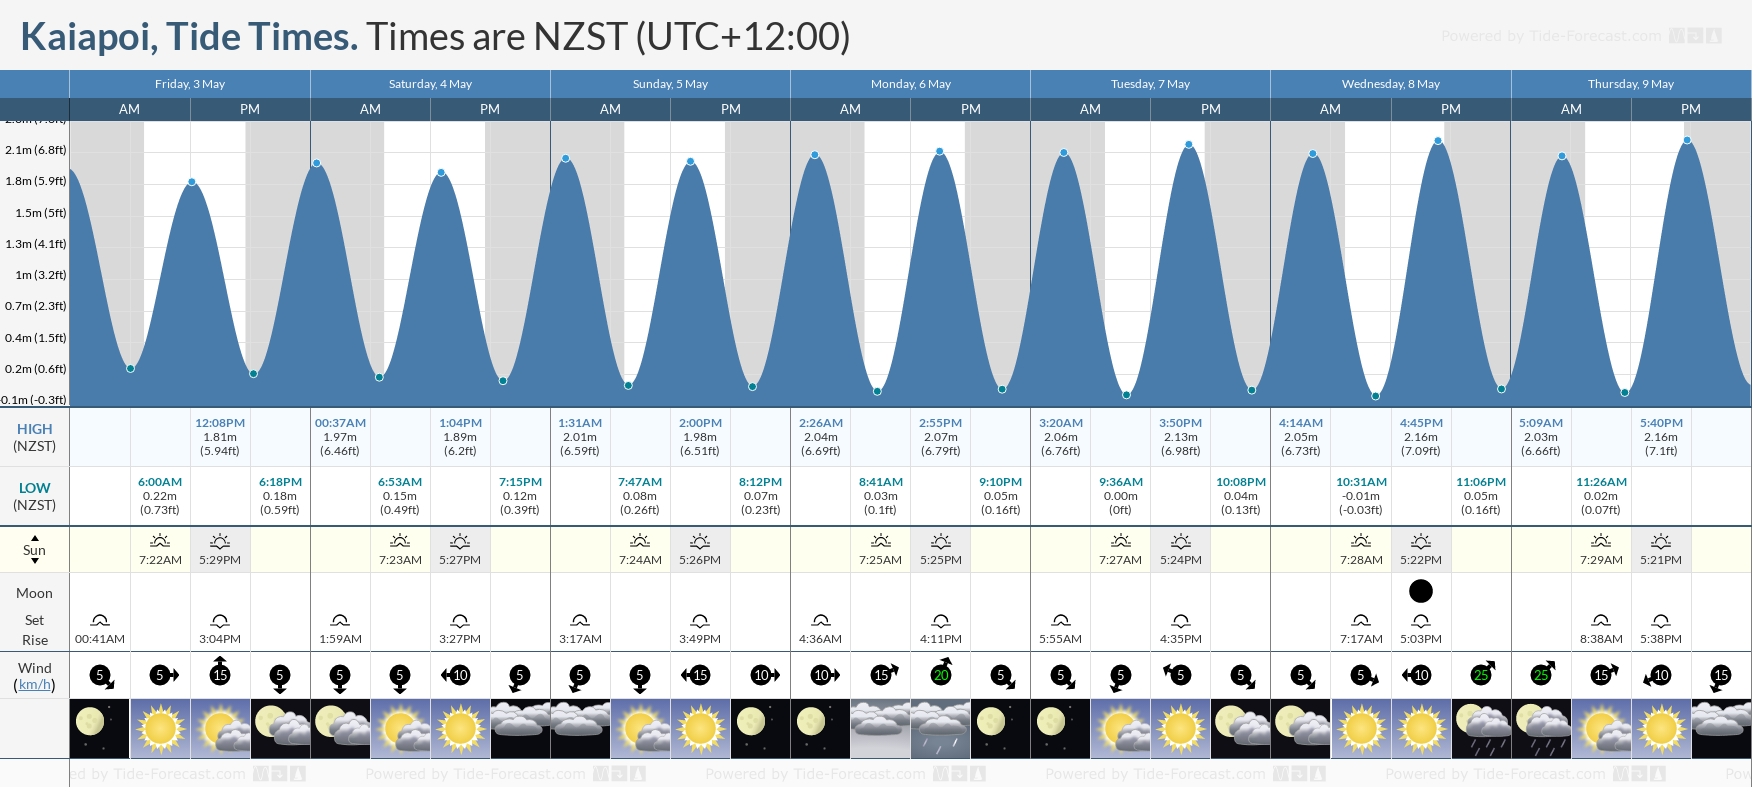 Kaiapoi Tide Chart including high and low tide tide times for the next 7 days